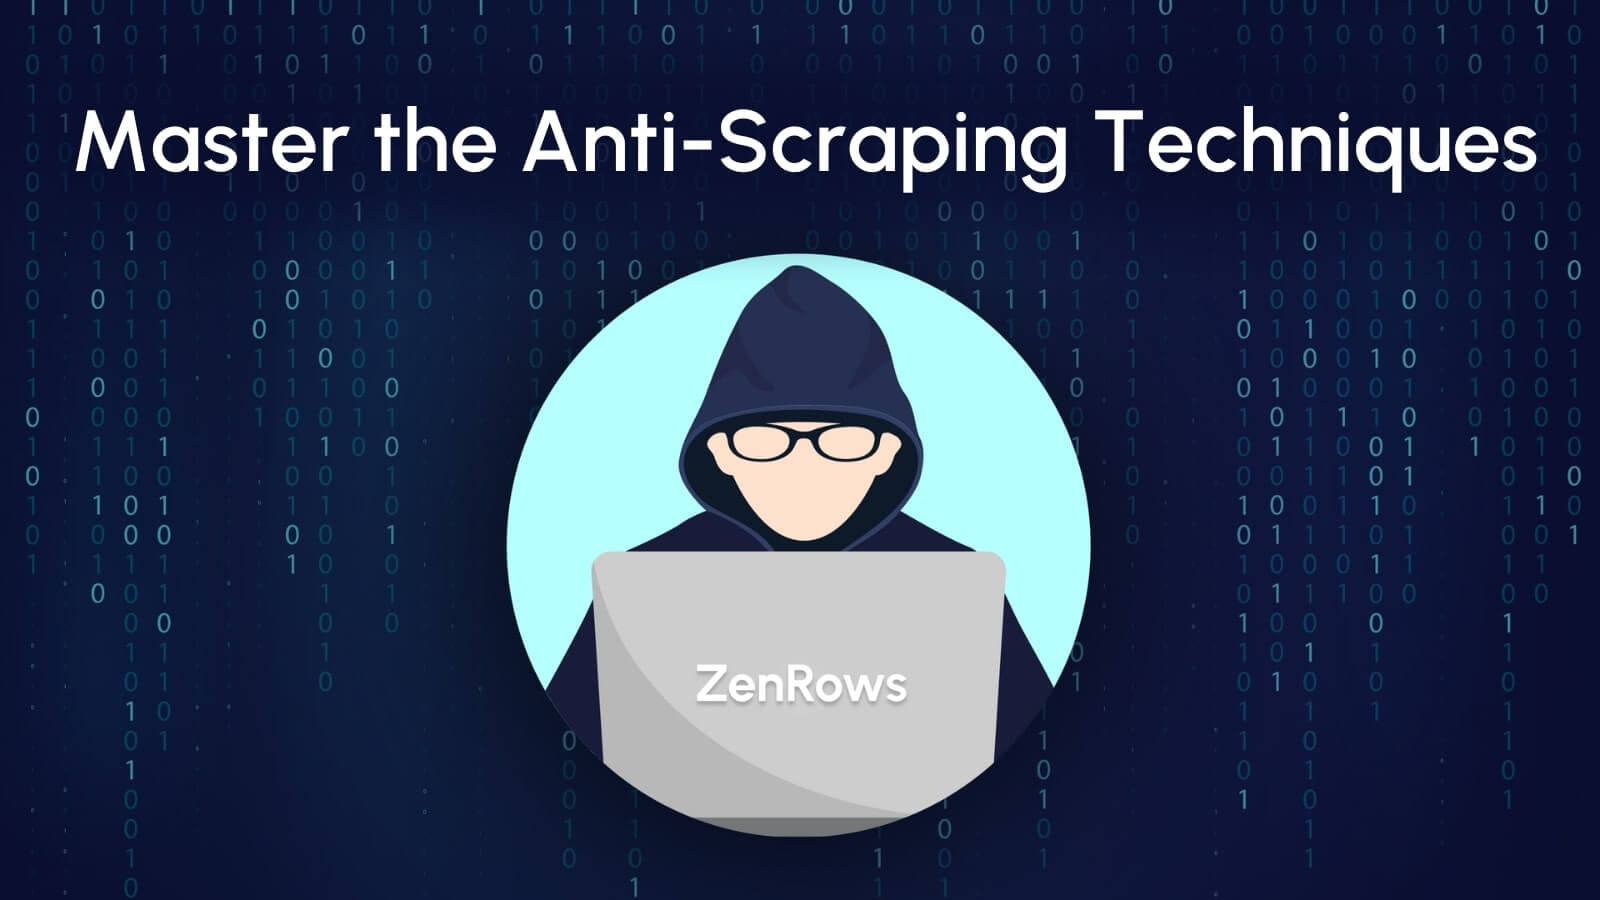 7 Anti-Scraping Techniques You Need to Know